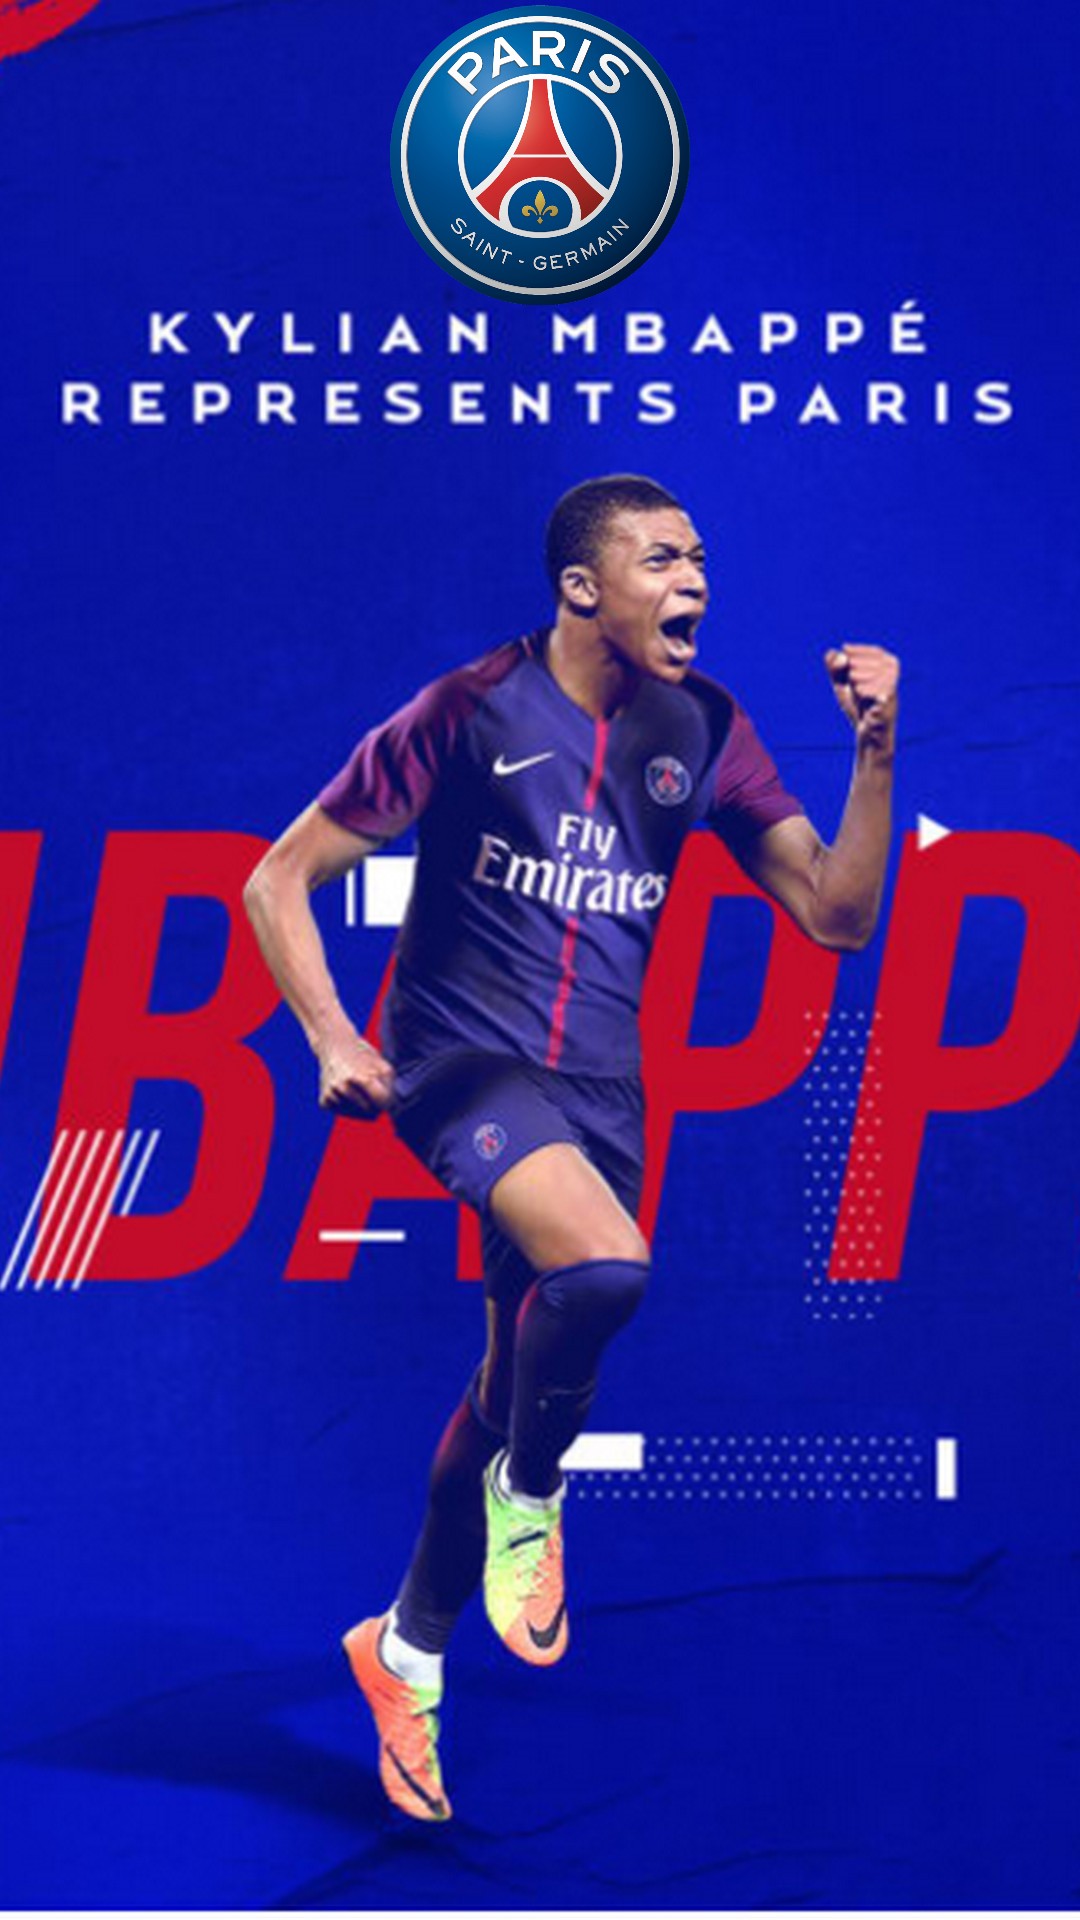 iPhone Wallpaper HD PSG Kylian Mbappe With Resolution 1080X1920 pixel. You can make this wallpaper for your Mac or Windows Desktop Background, iPhone, Android or Tablet and another Smartphone device for free